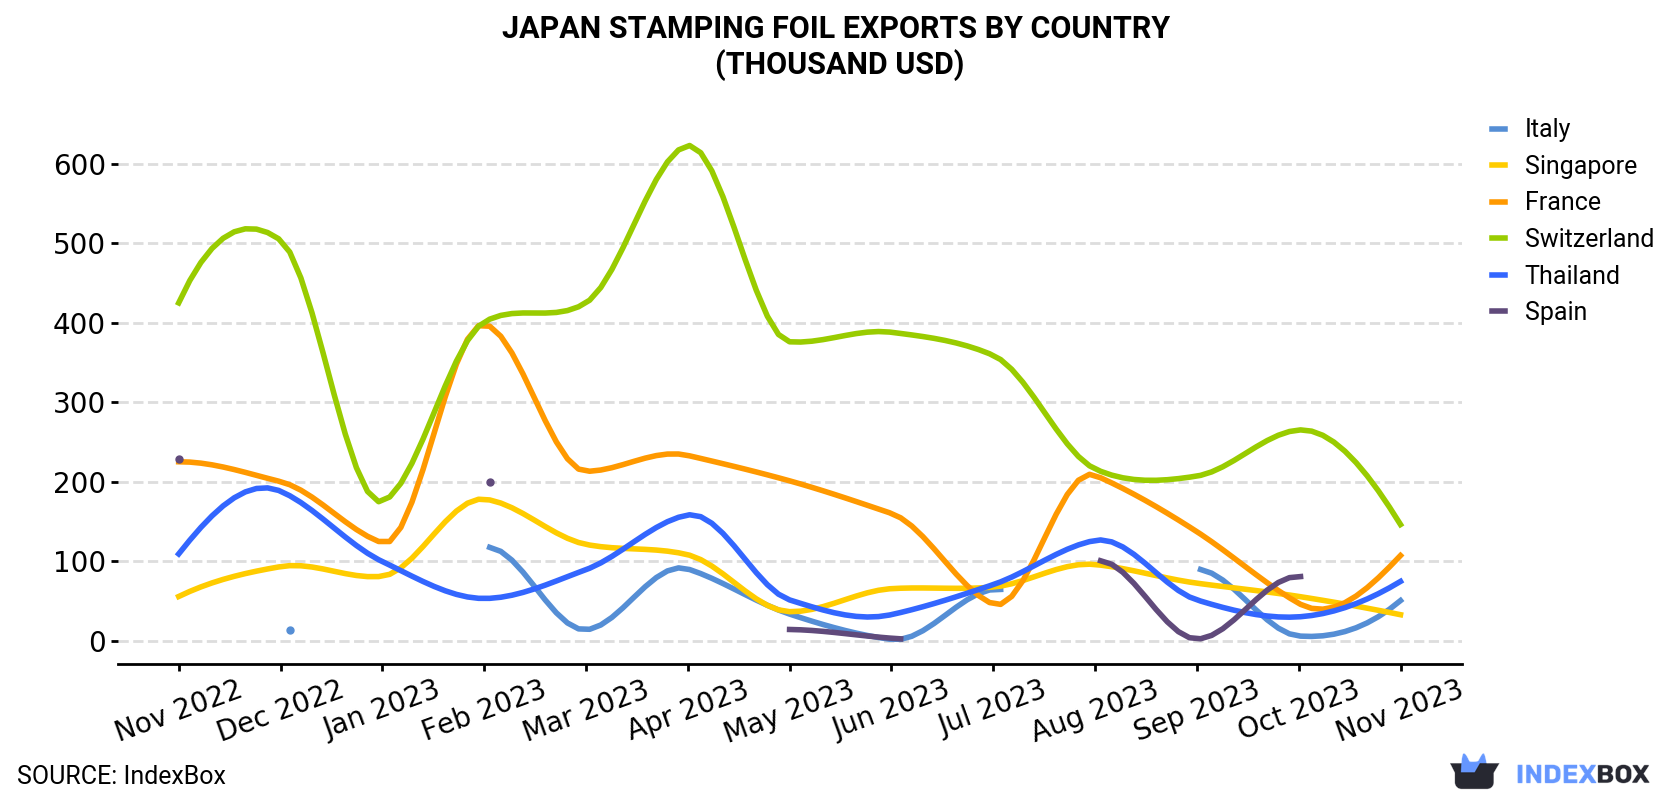 Japan Stamping Foil Exports By Country (Thousand USD)